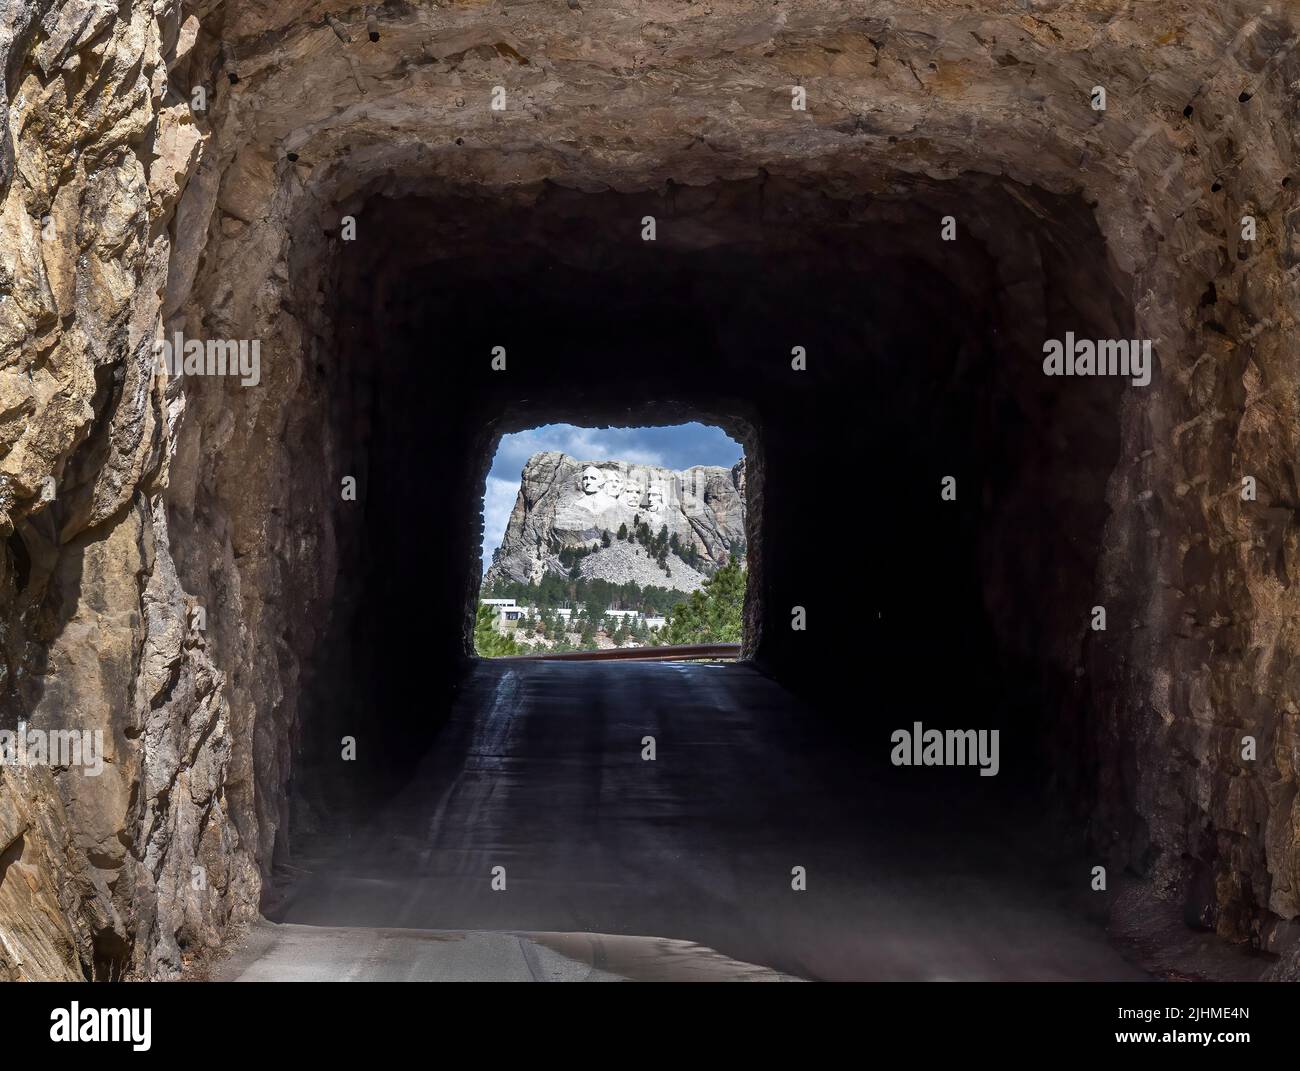 Mount Rushmore National Memorial though the Doane Robinson Tunnel on Iron MountaIn Road part of the Peter Norbeck Scenic National Byway in the Black H Stock Photo